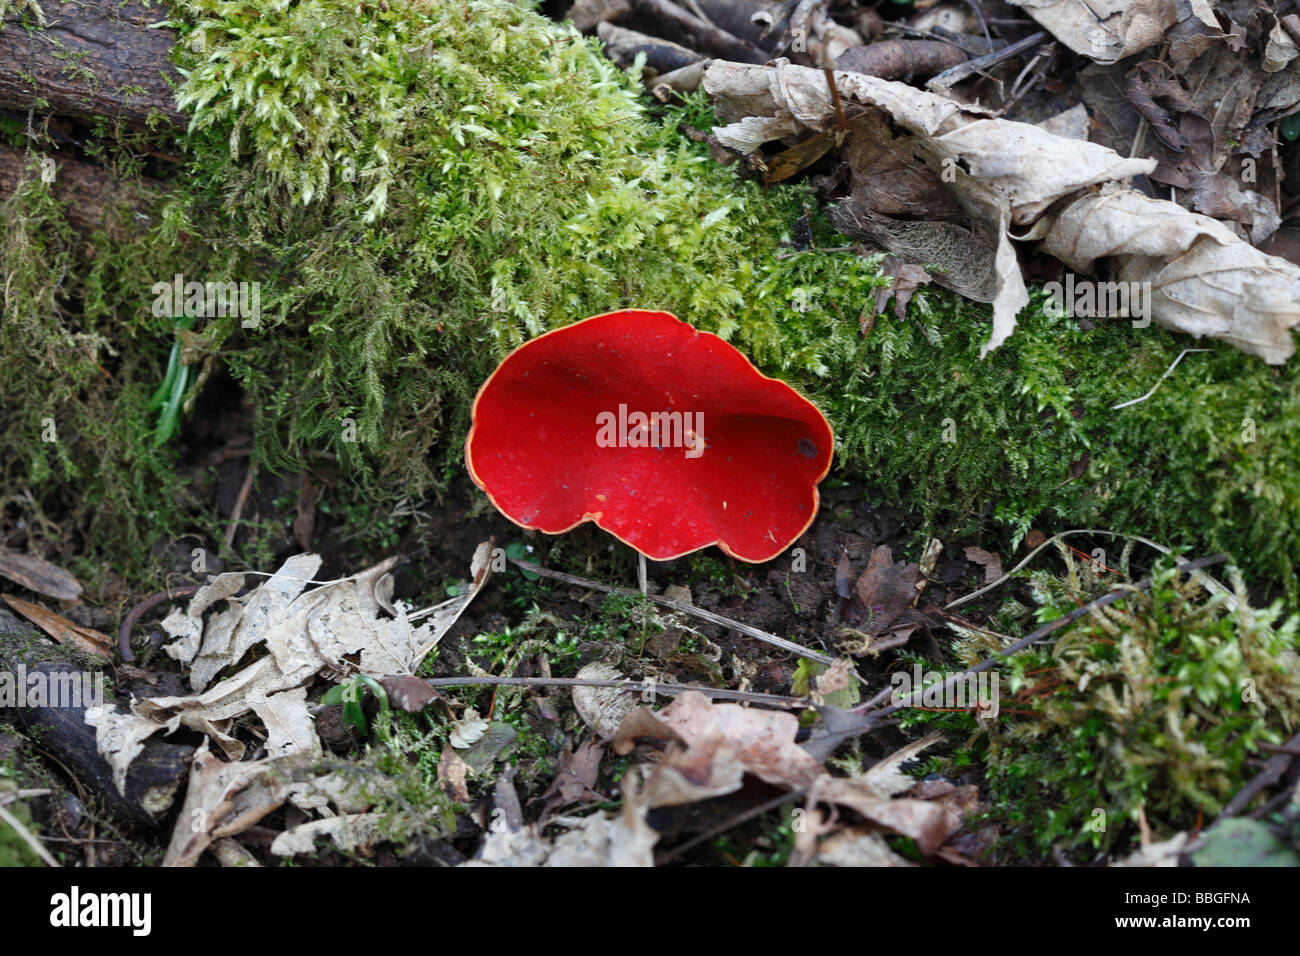 SCARLET ELF CUP sarcoscypha coccinea GROWING ON MOSS COVERED DEAD BRANCH Stock Photo